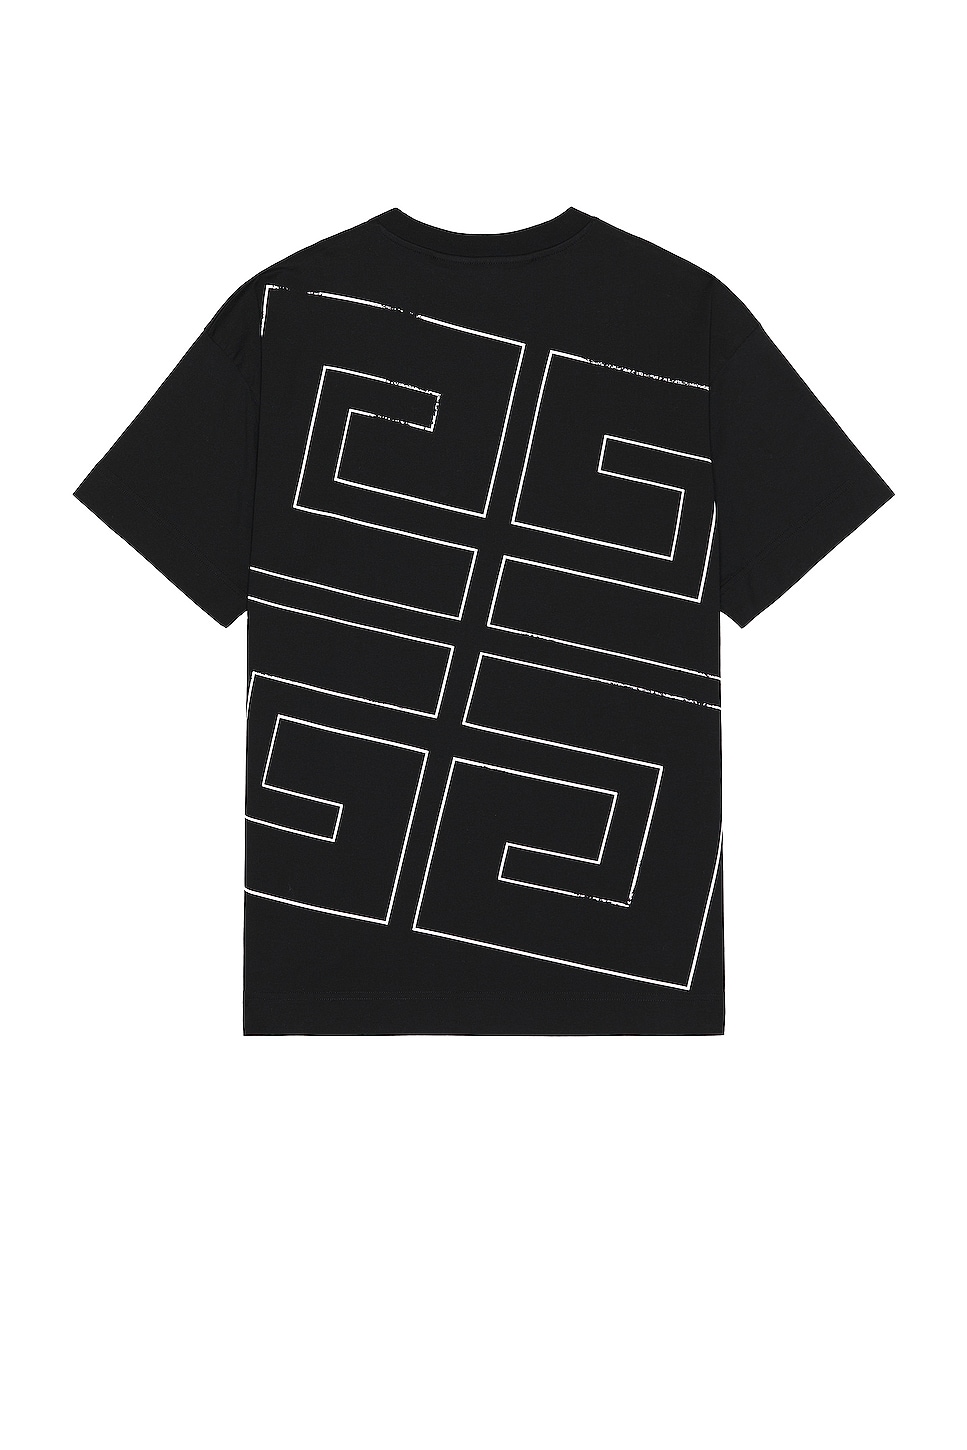 Image 1 of Givenchy Standard Short Sleeve Base Tee in Black